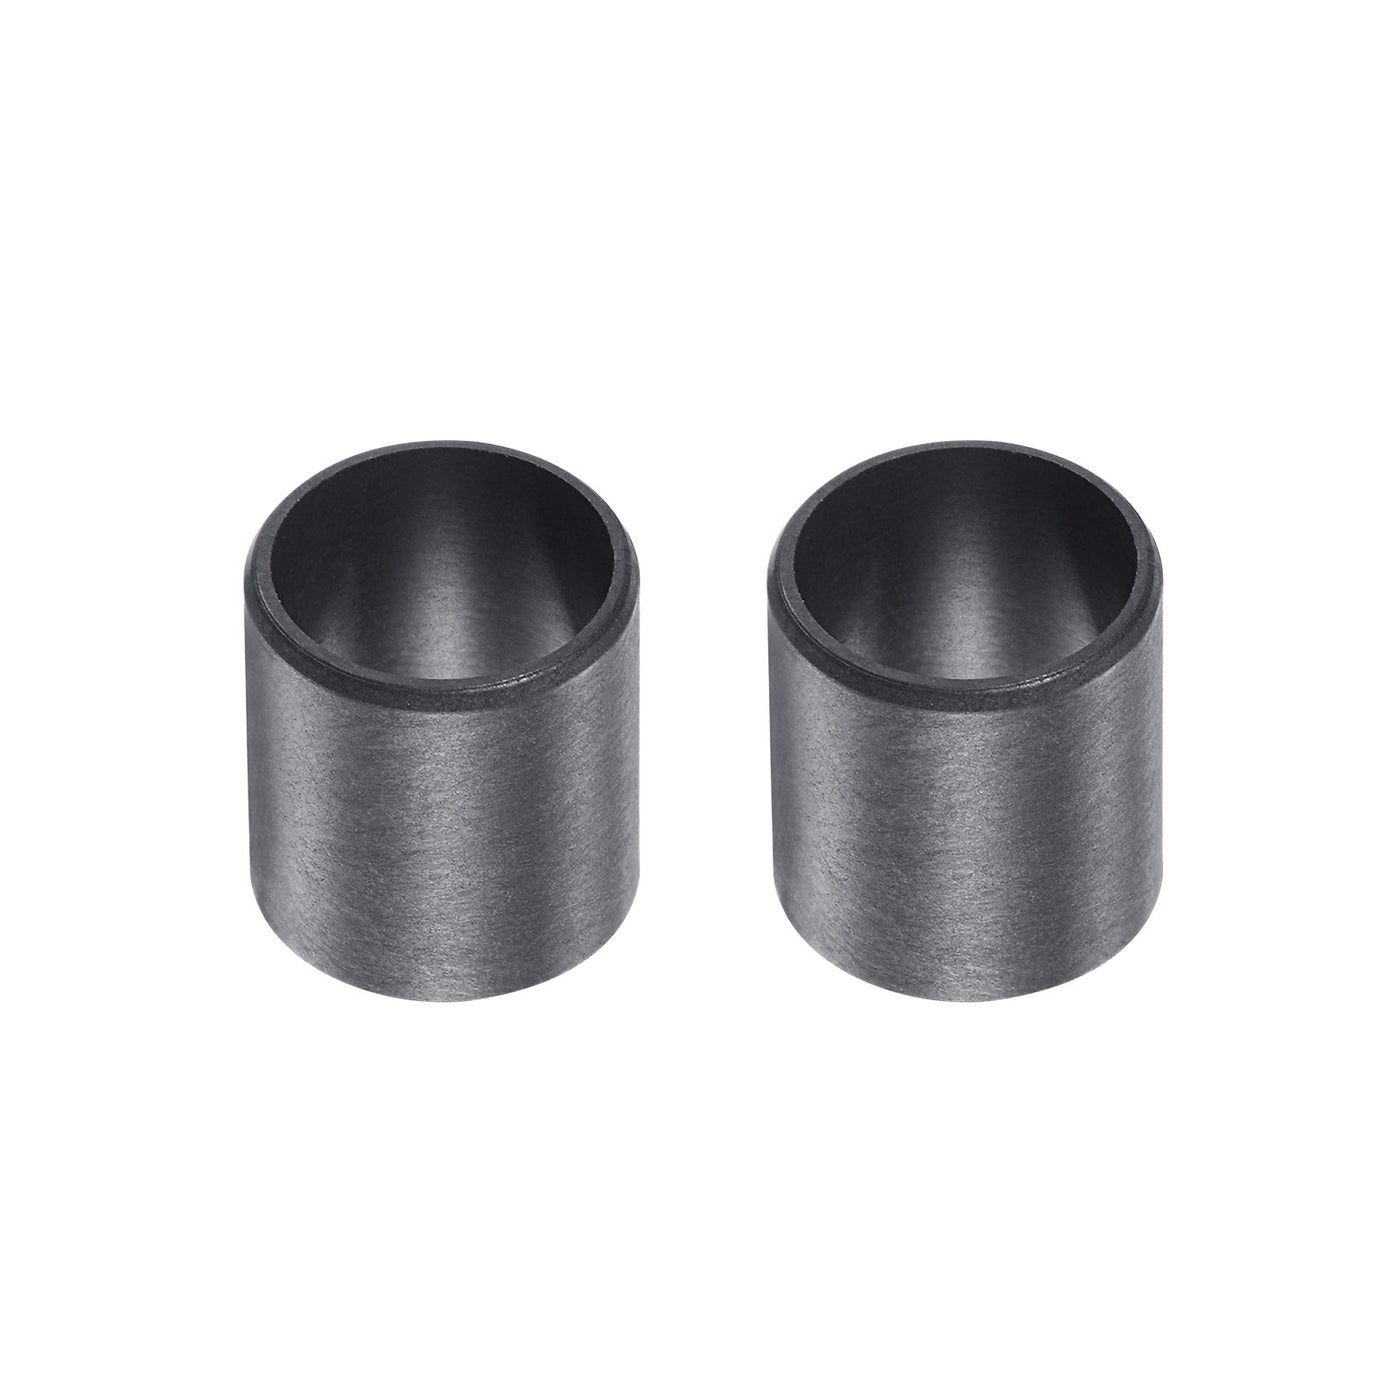 uxcell Uxcell Sleeve Bearings 12mmx14mmx15mm POM Wrapped Oilless Bushings Black 2pcs